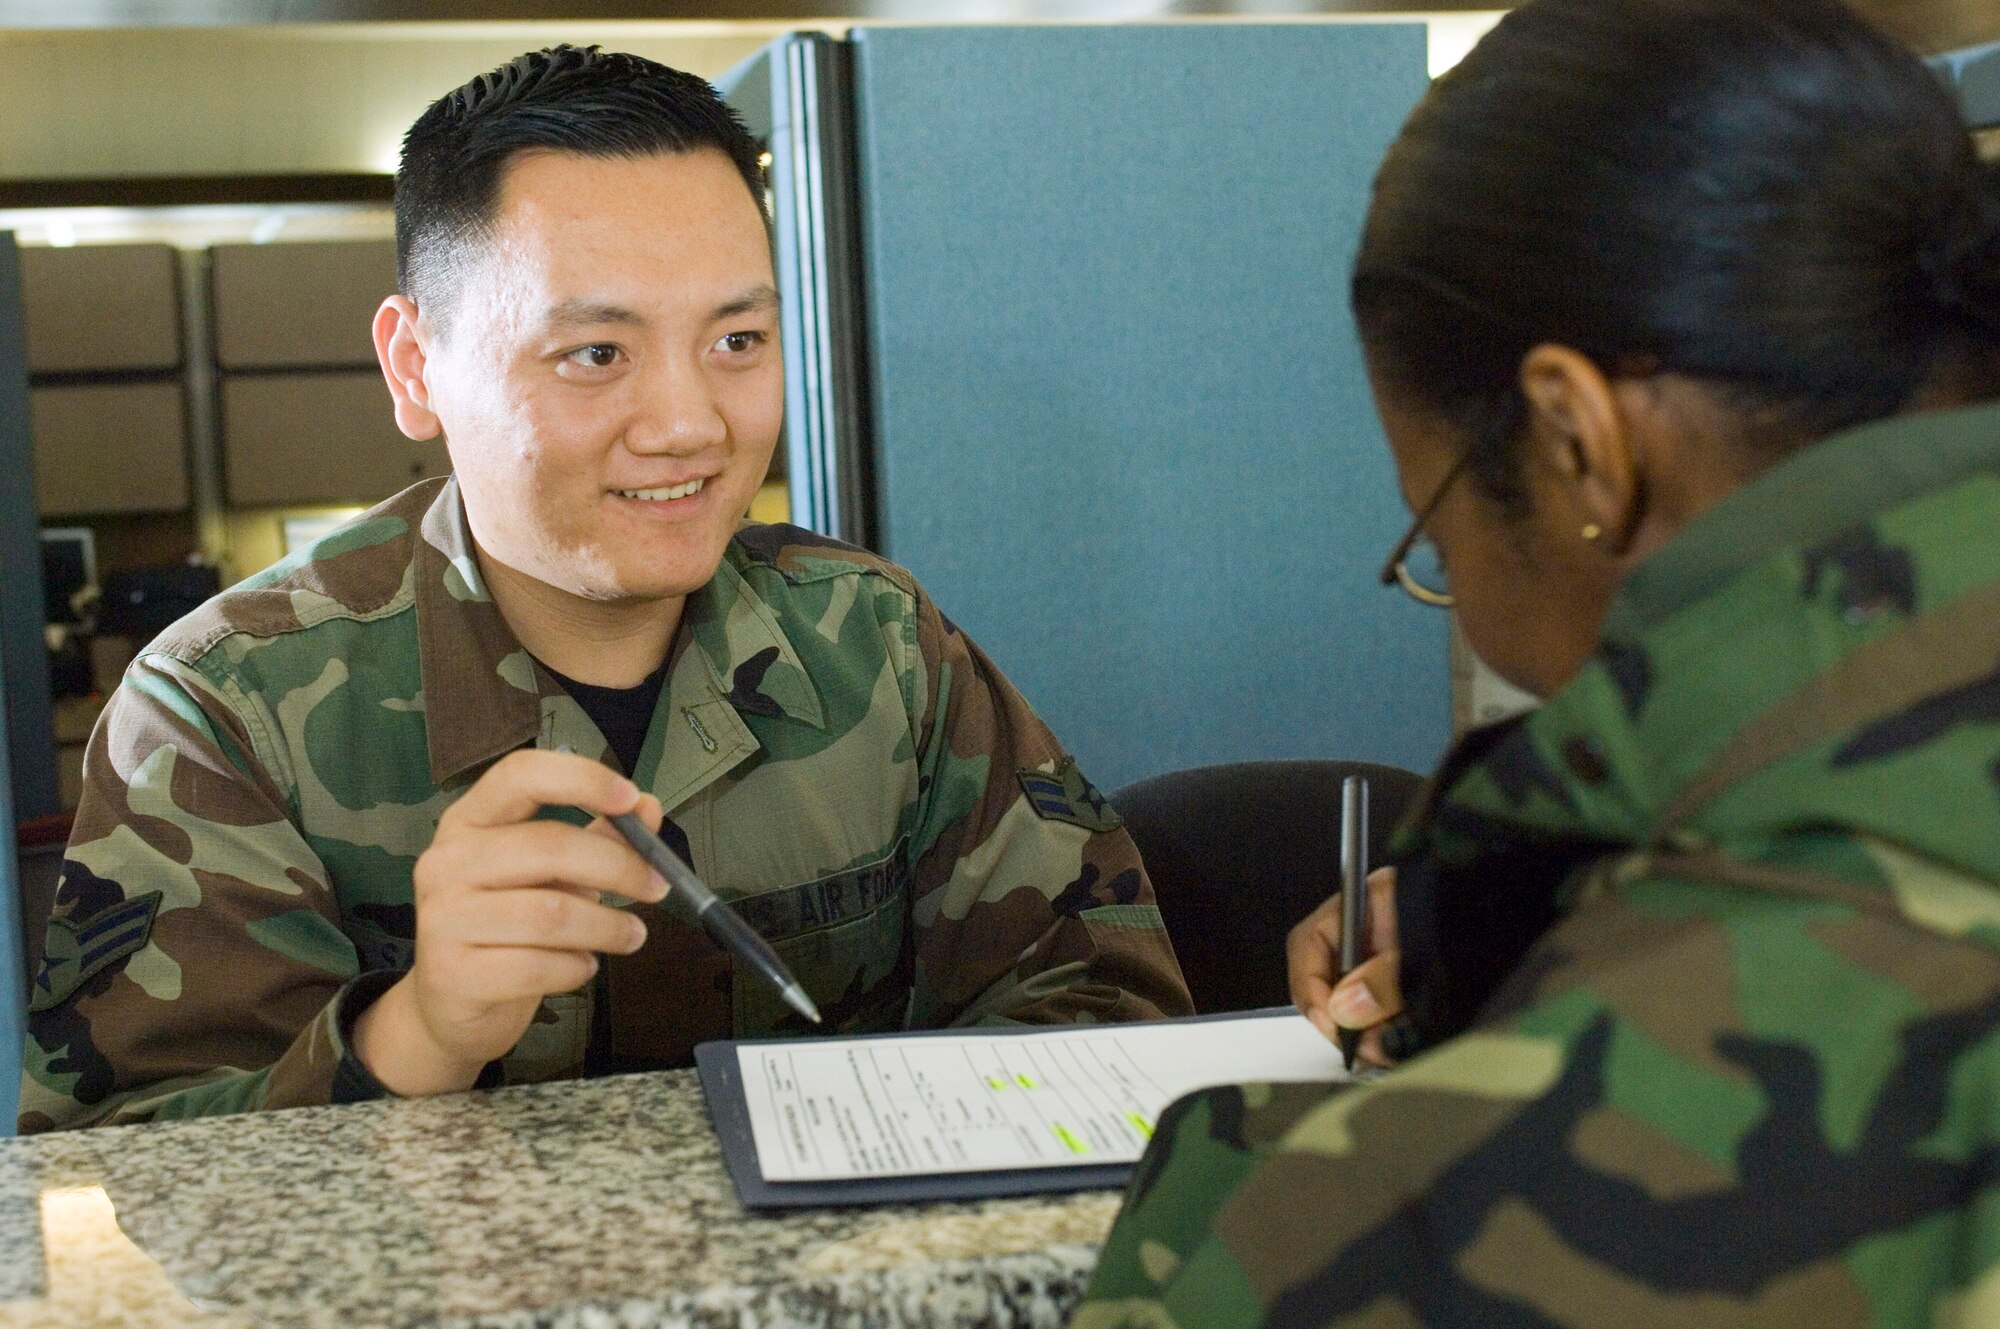 Airman 1st Class Michael Saechao clarifies an inprocessing form for a finance customer at Ramstein Air Base, Germany, on Tuesday, April 18, 2006. Airman Saechao is a financial customer service technician with the 435th Comptroller Squadron. Born in America to Thai parents, he joined the Air Force to travel. (U.S. Air Force photo/Master Sgt. John E. Lasky)
